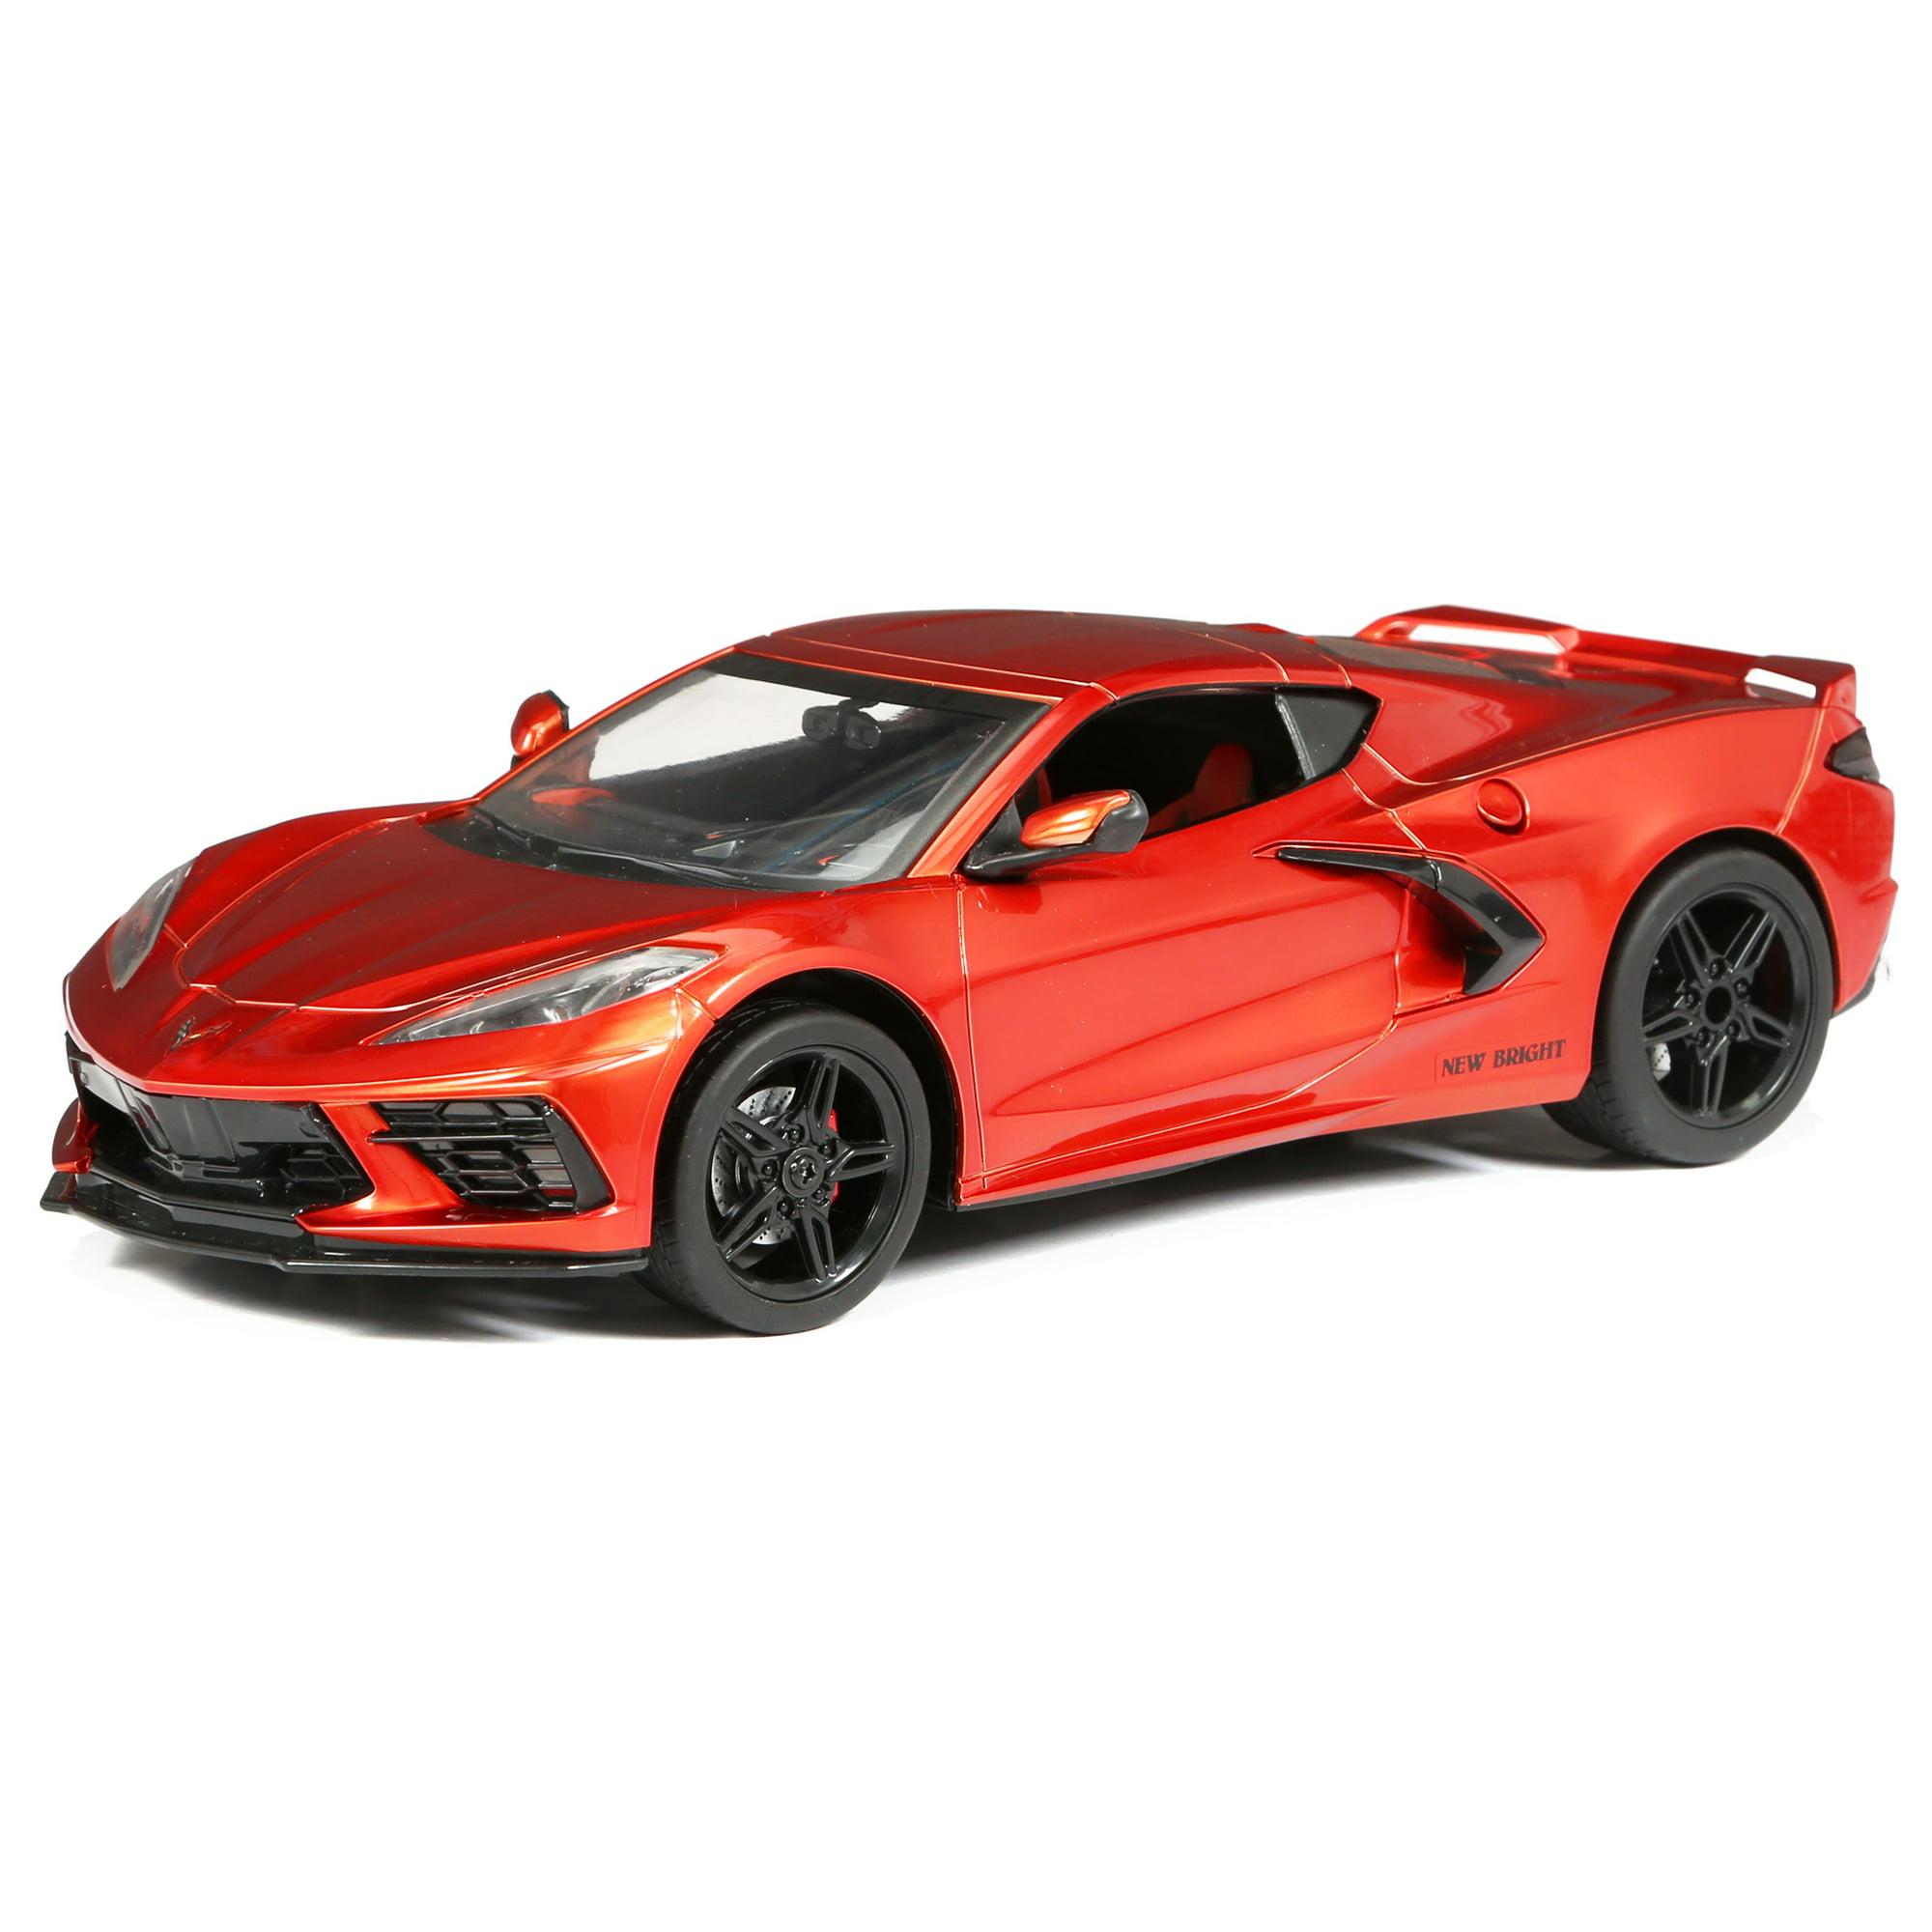 Corvette Remote Control Car: Realistic features of the Corvette remote control car, including LED lights and multiple control options 